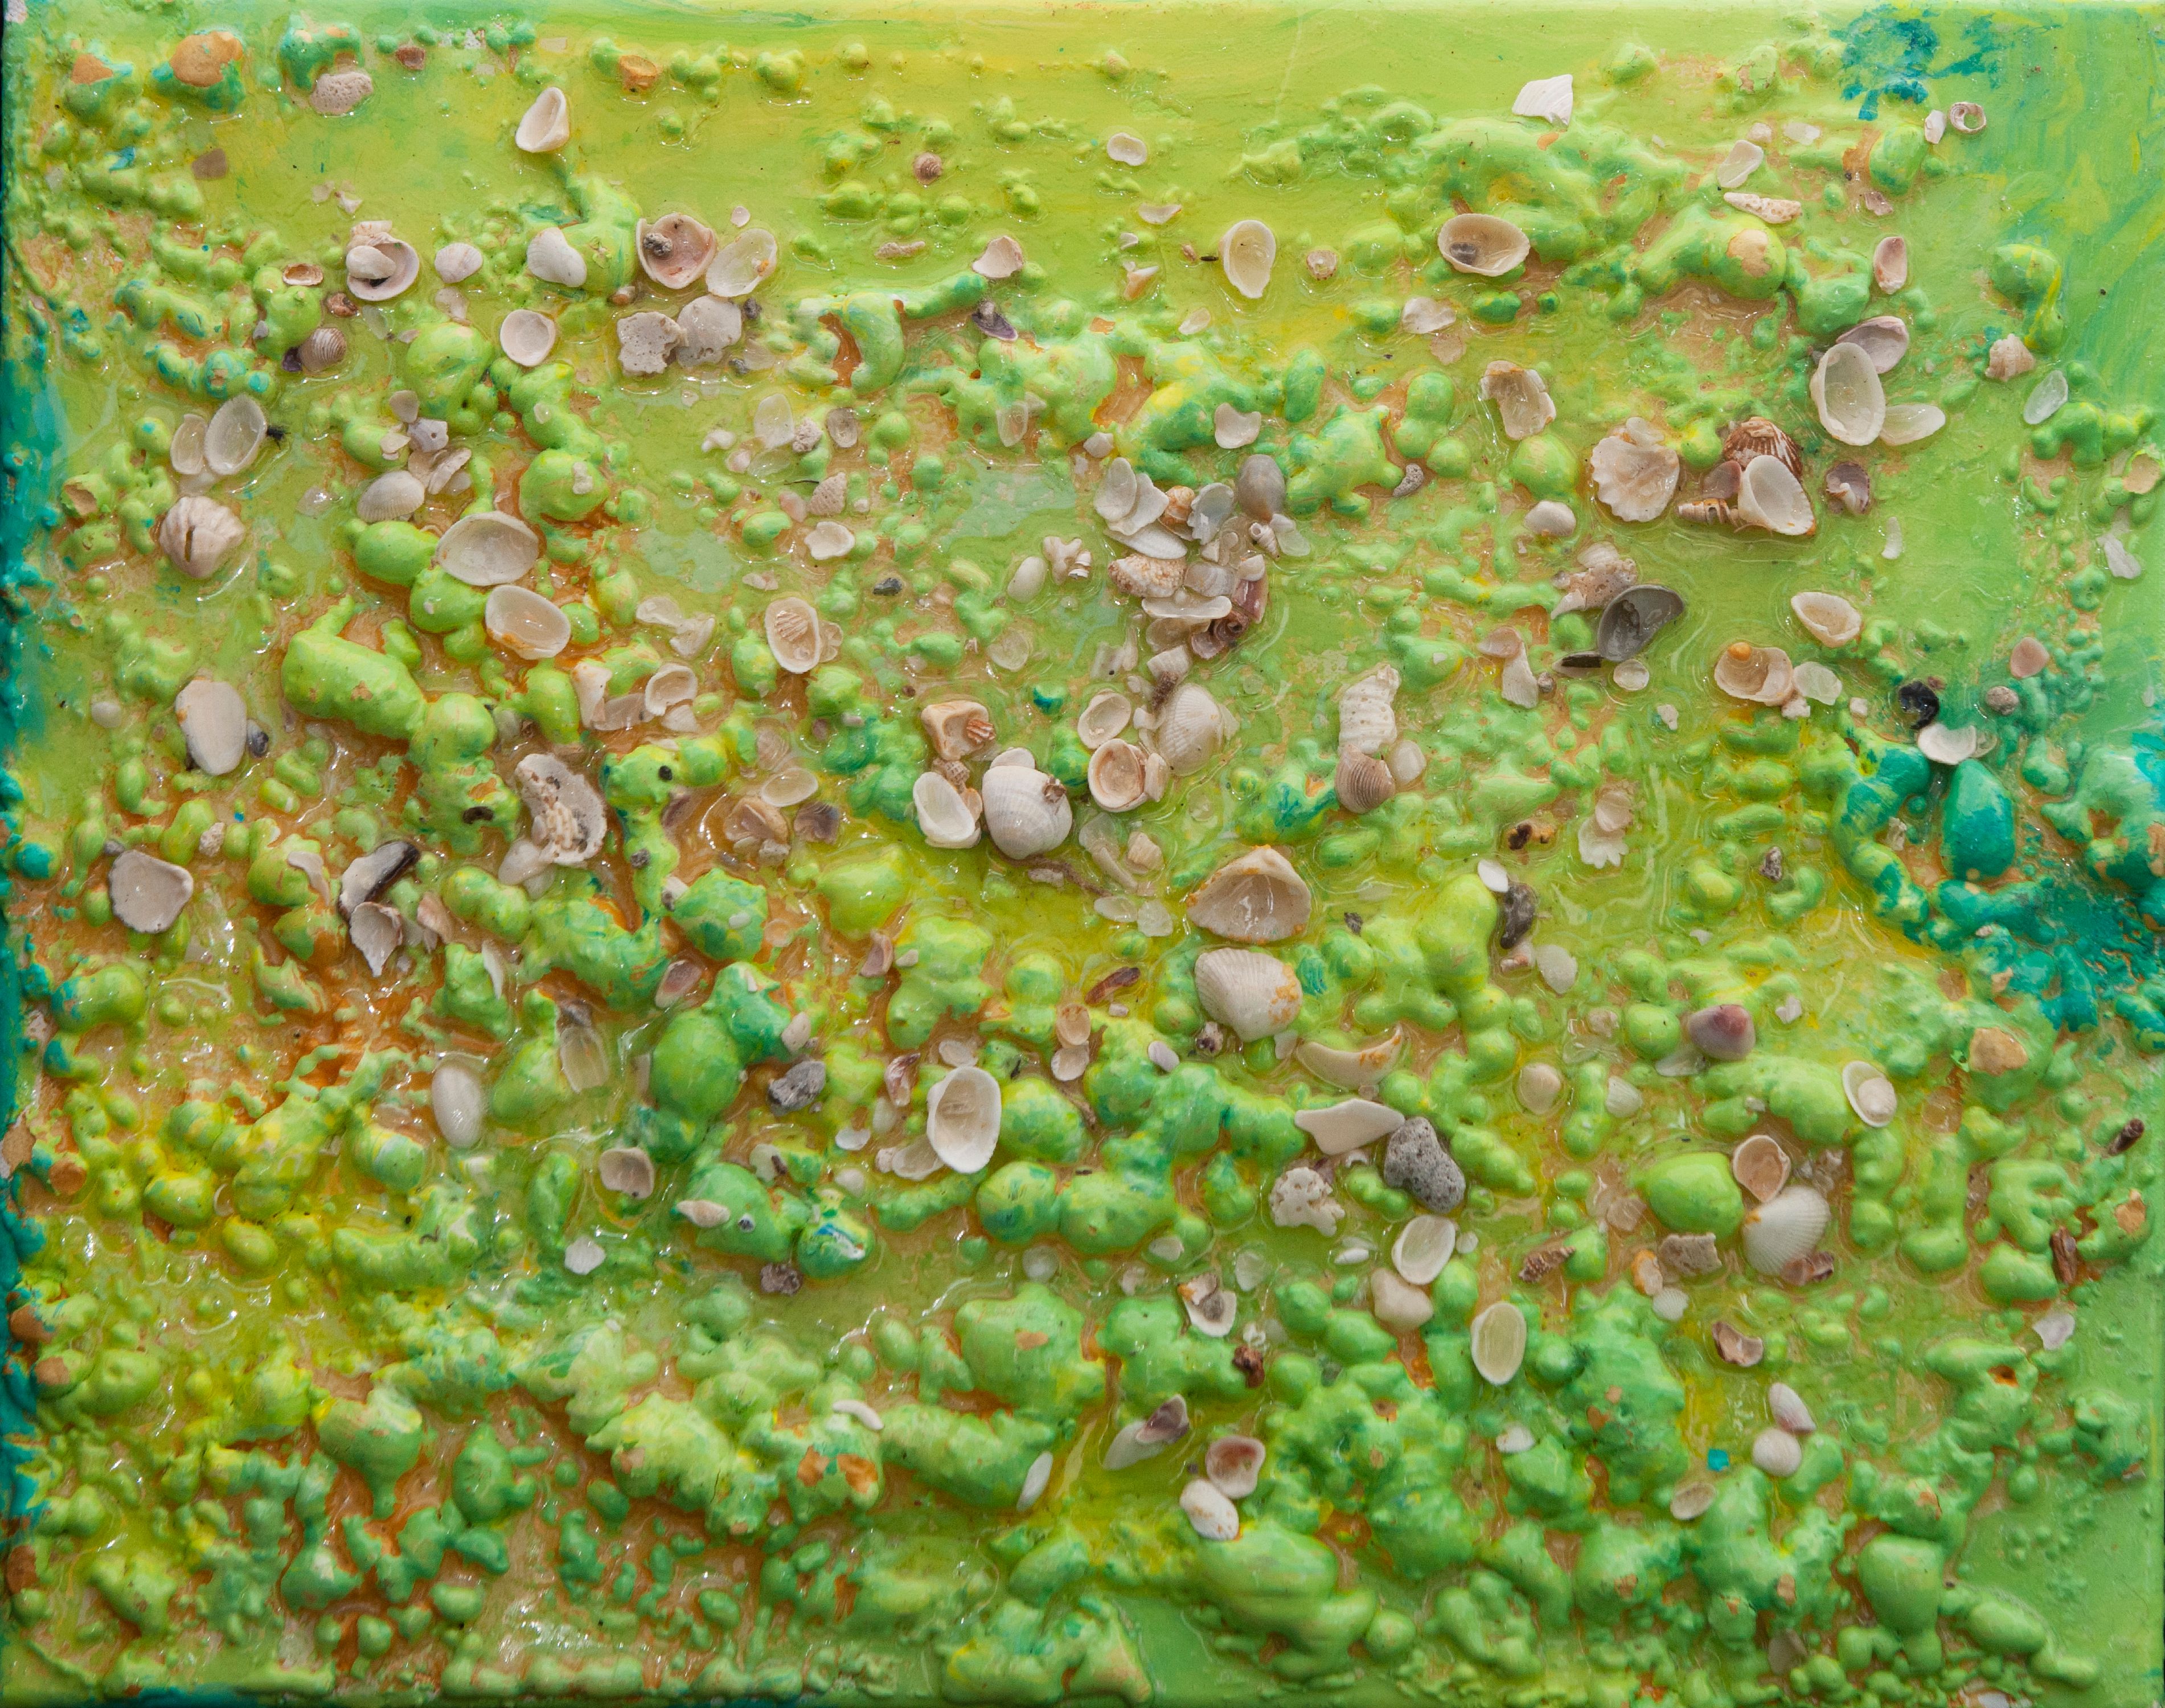 Abstract #23  Yellow & Green 20"x16"